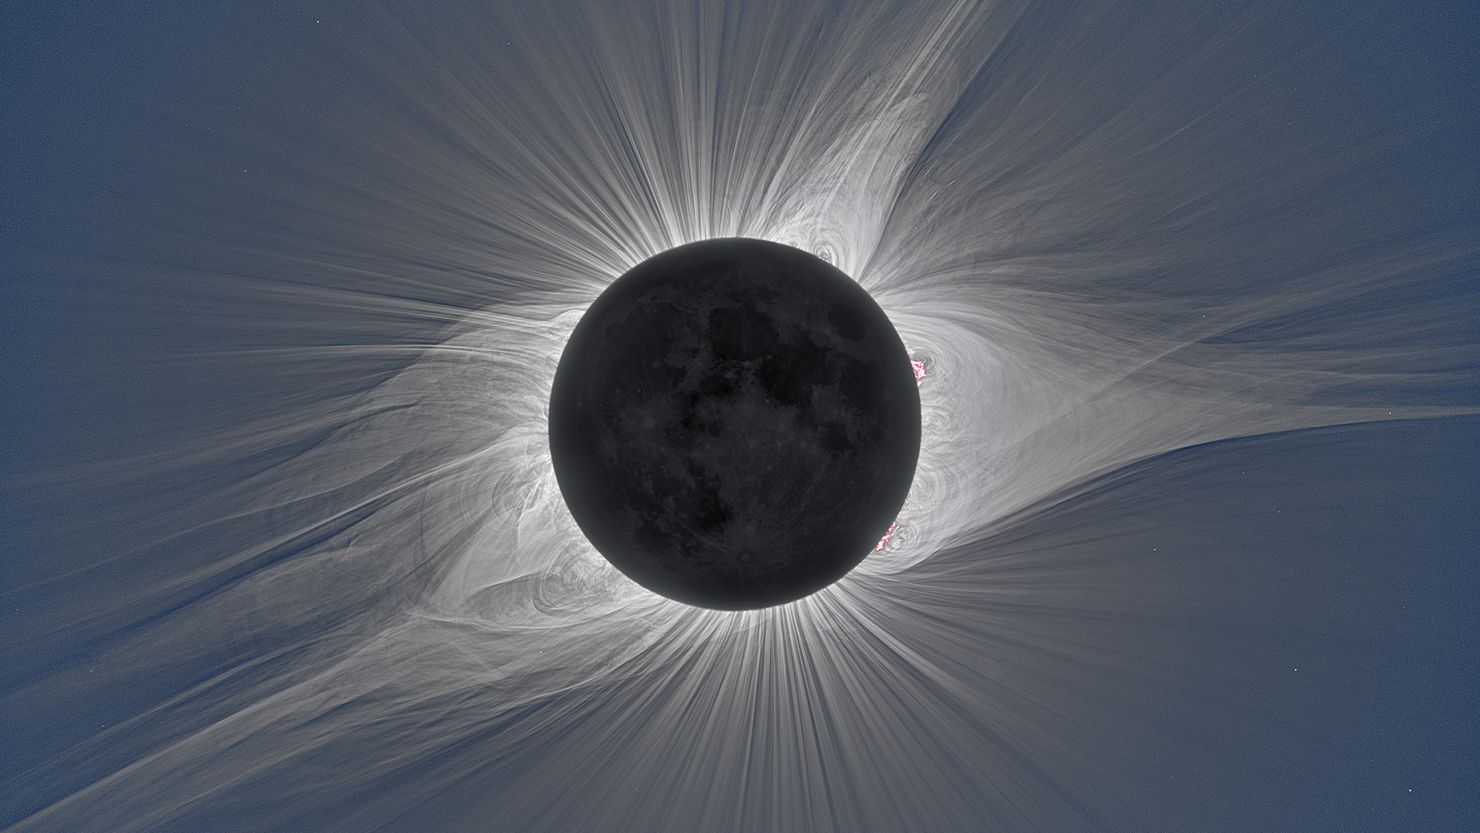 The solar corona glows in visible white light during the total solar eclipse over Mitchell, Oregon, on August 21, 2017, from an image taken during an experiment.